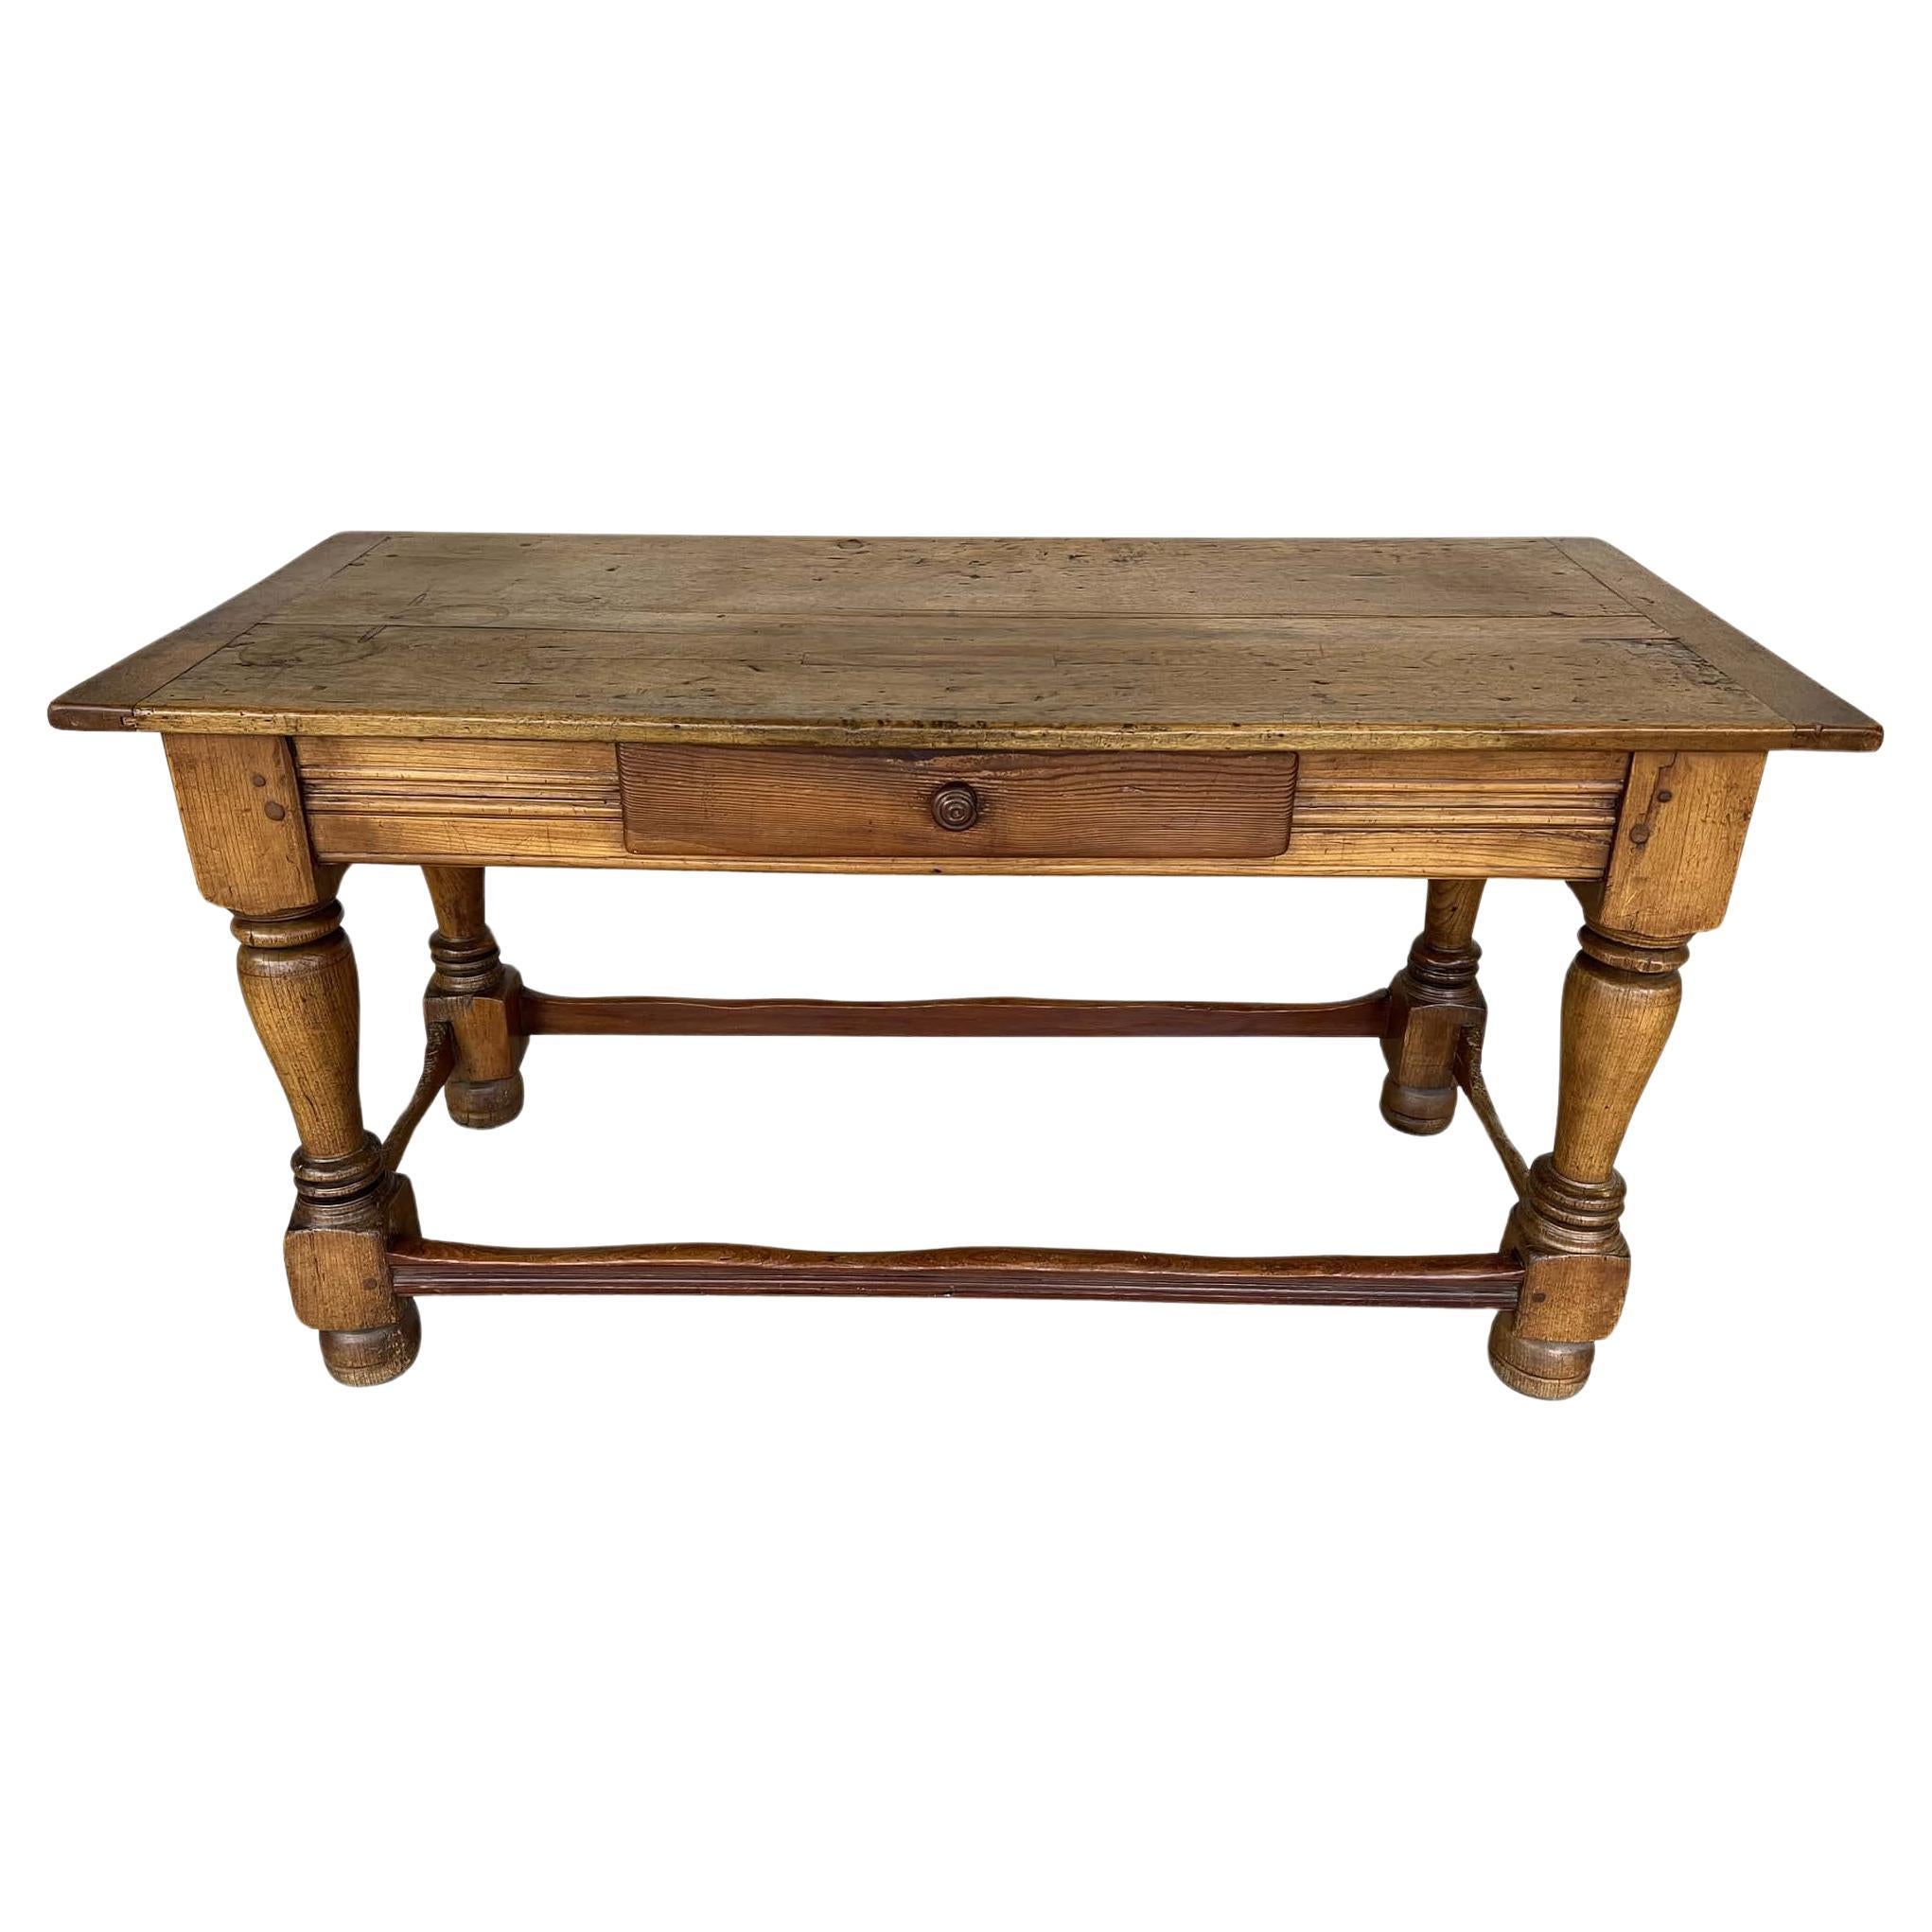 Antique Swiss Alps Farmhouse Small Dining Table or Writing Desk With Drawer